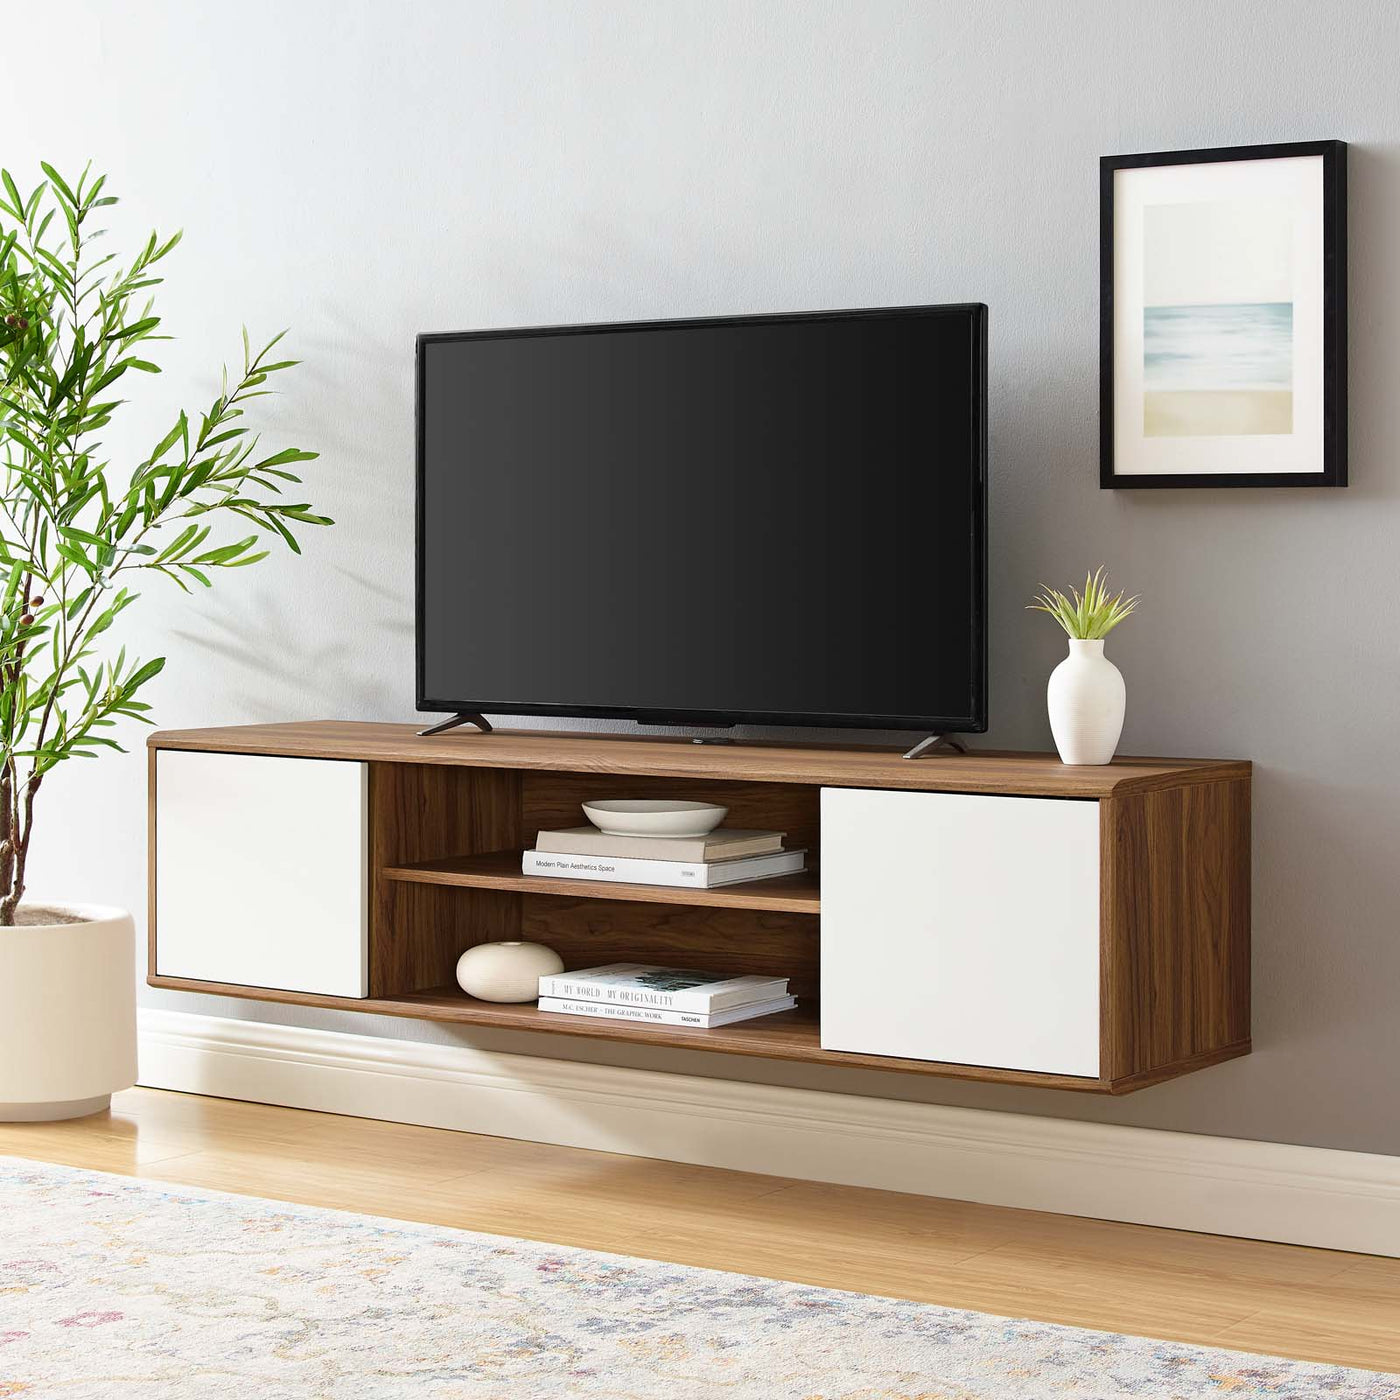 Wooden TV Stand with Drawers : Kenty Funitures